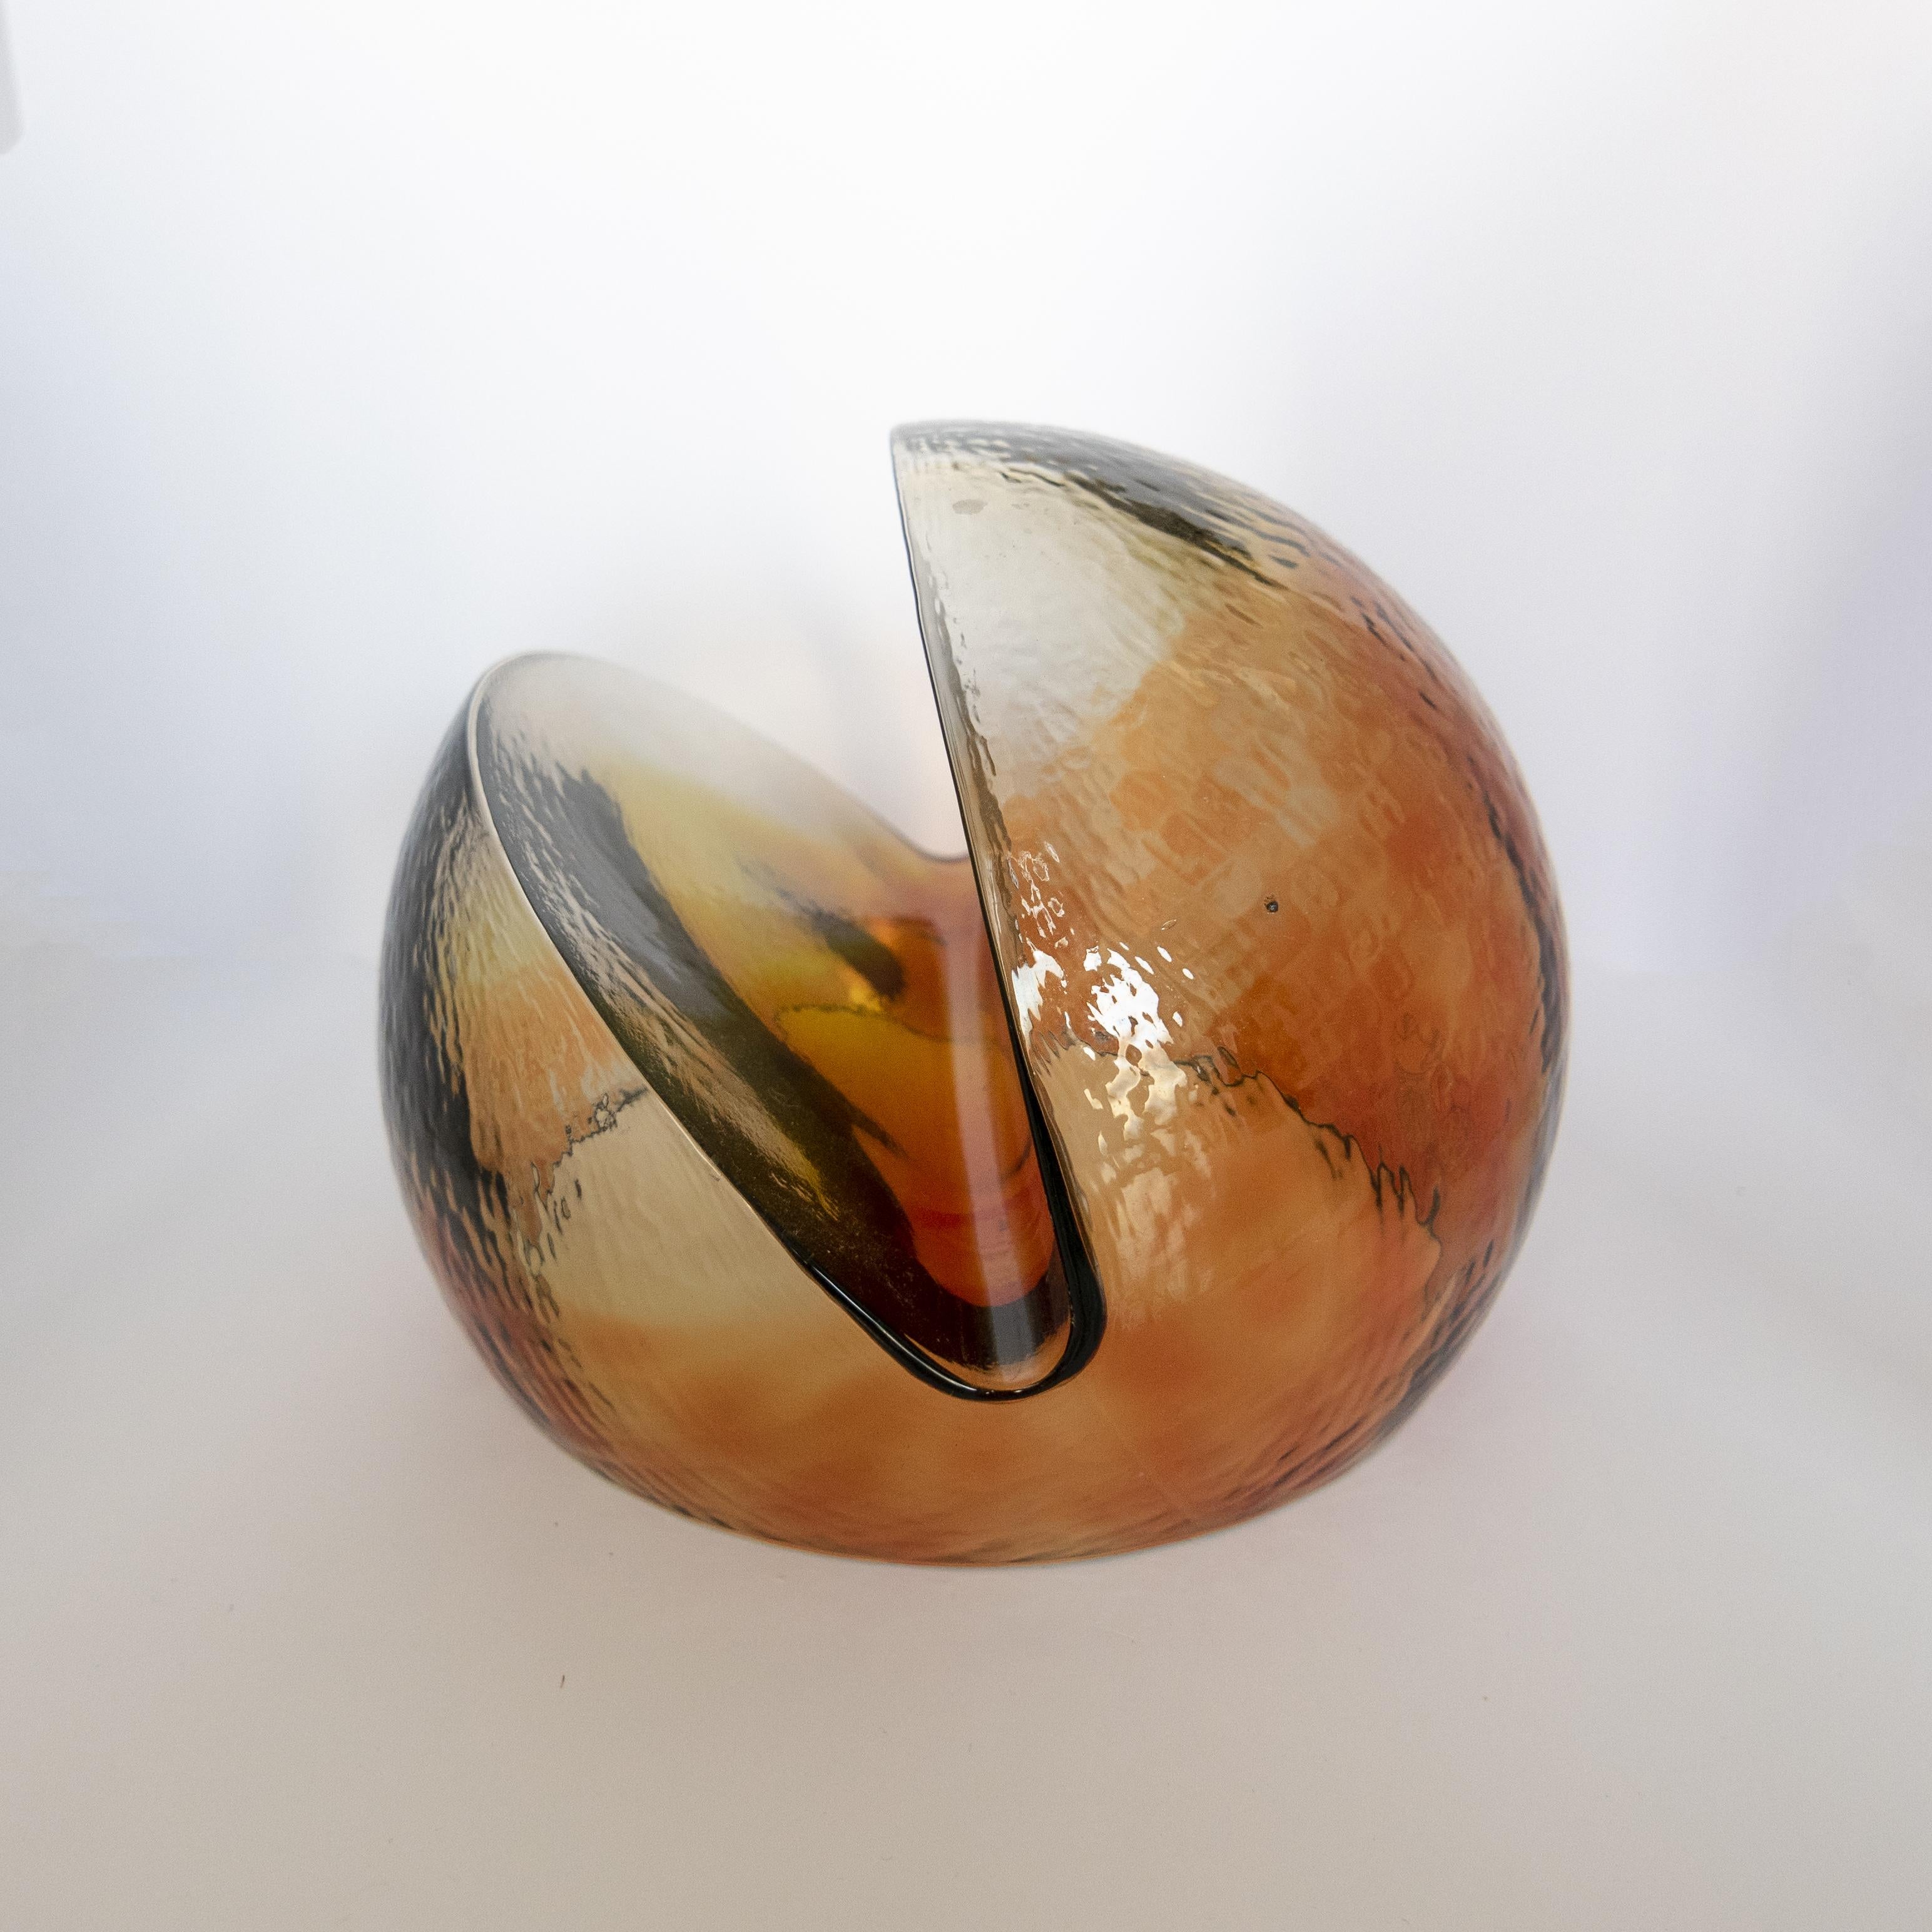 Italian Vintage Orange Murano Glass Sculpture / Paperweight by Tony Zuccheri for VeArt